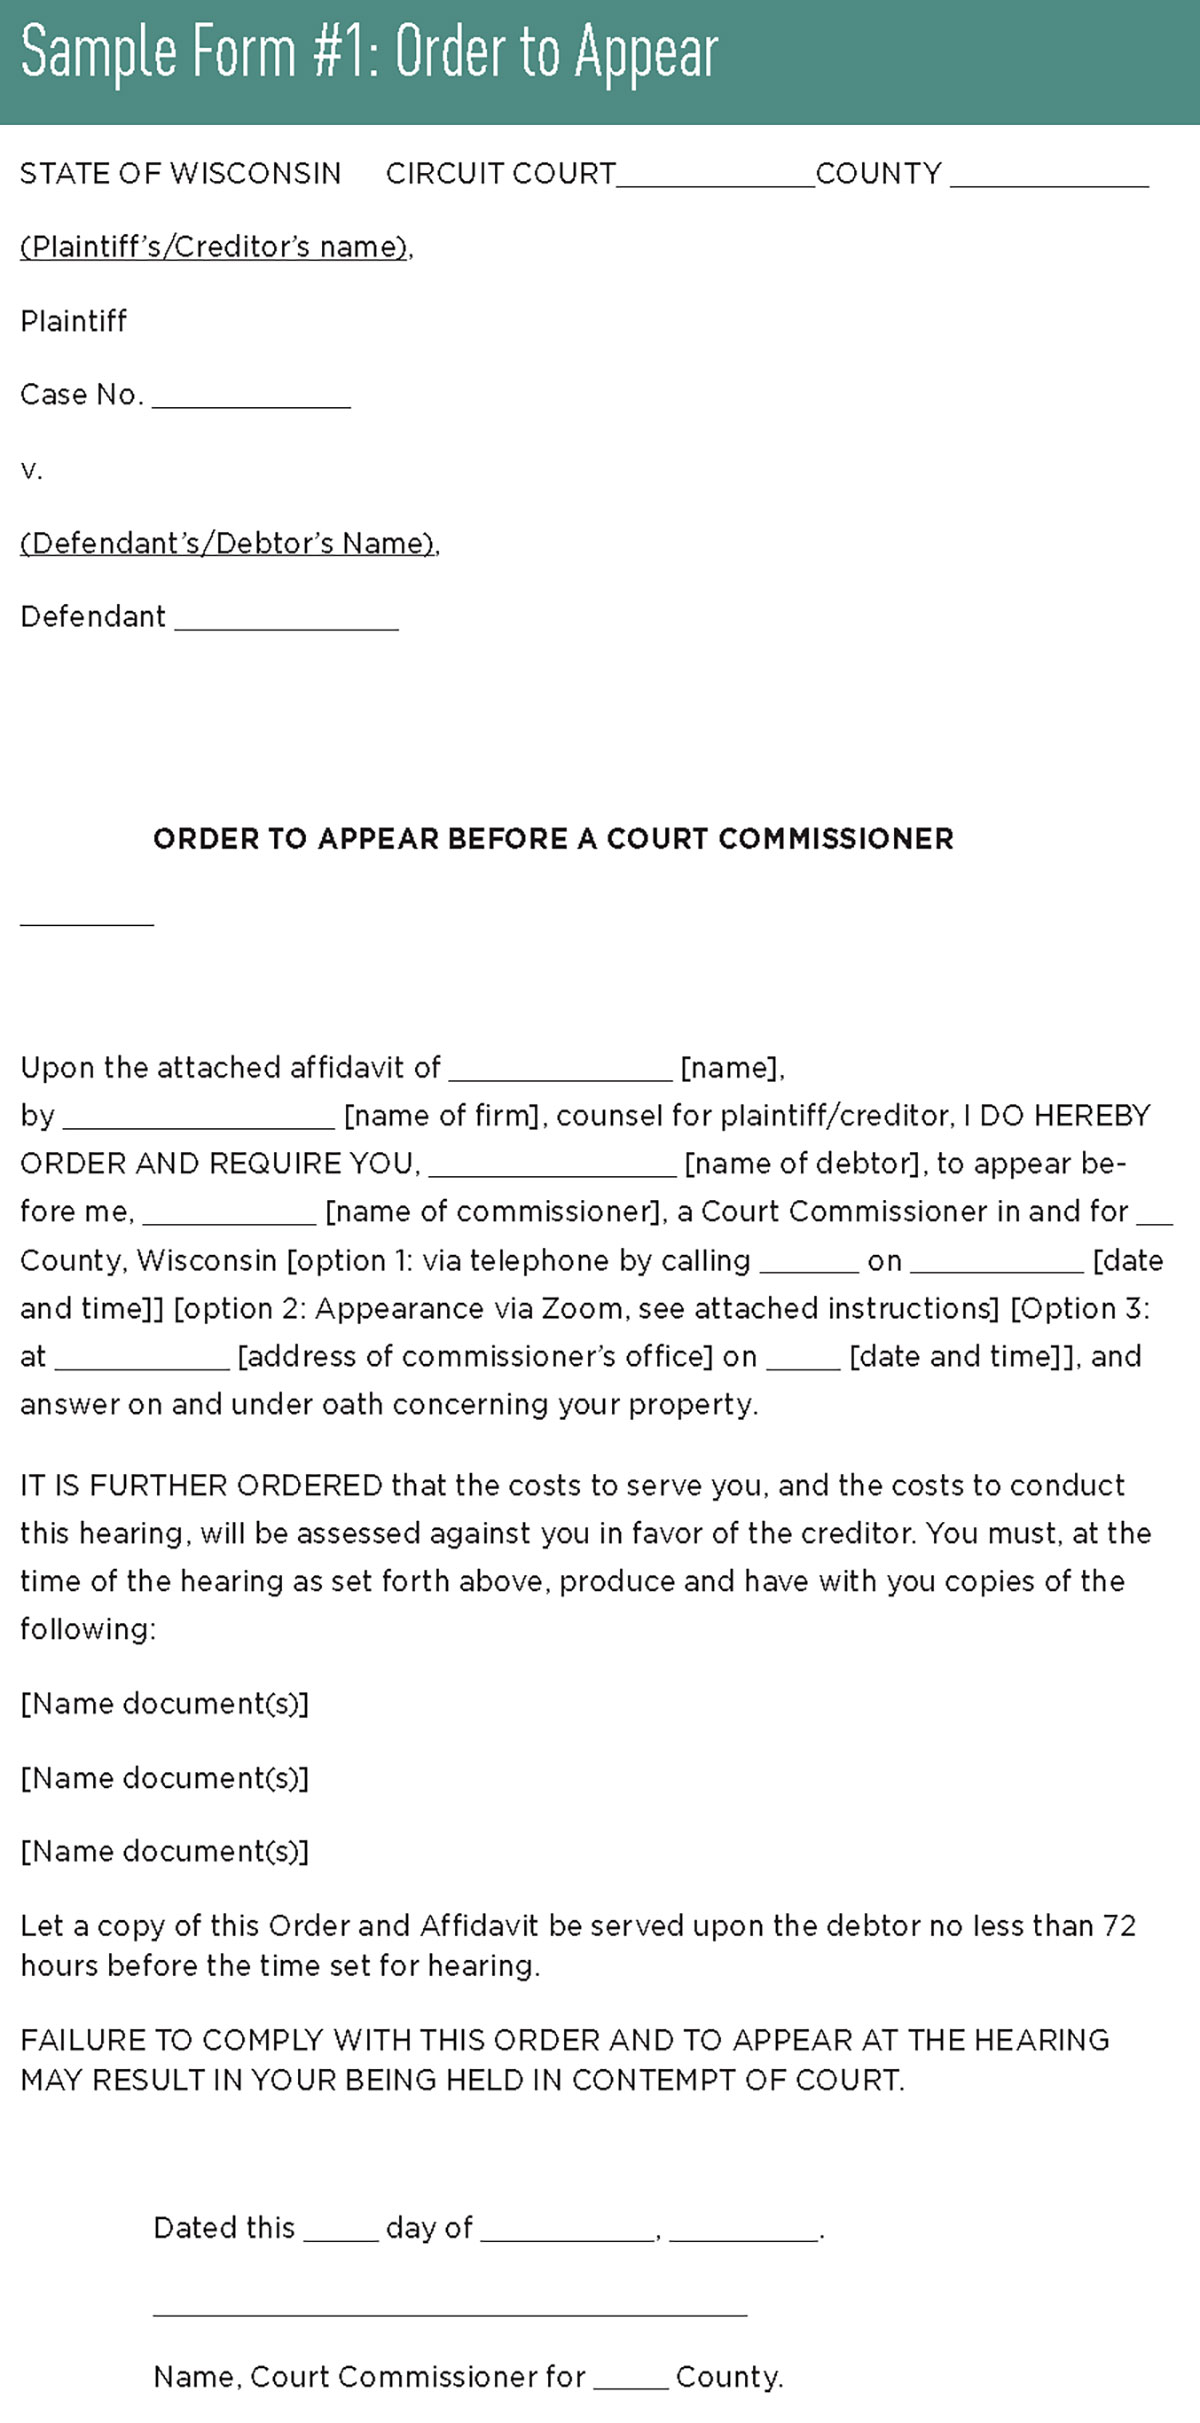 Sample form 1: Order to appear